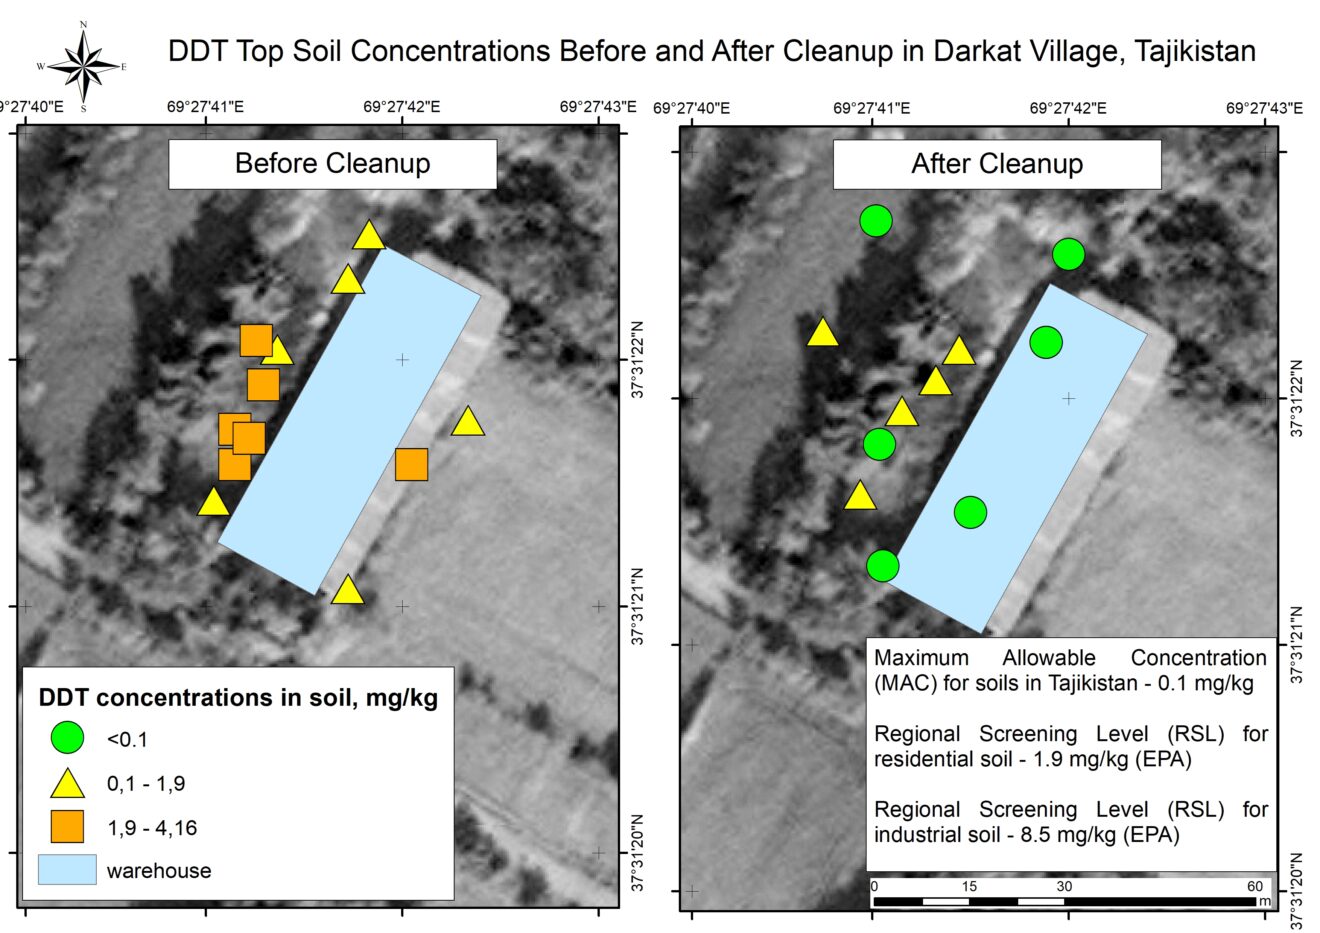 DDT topsoil concentrations before and after cleanup in Darkat Village, Tajikistan, Peshsaf, Environmental Health and Pollution Health Institute, EHPMI